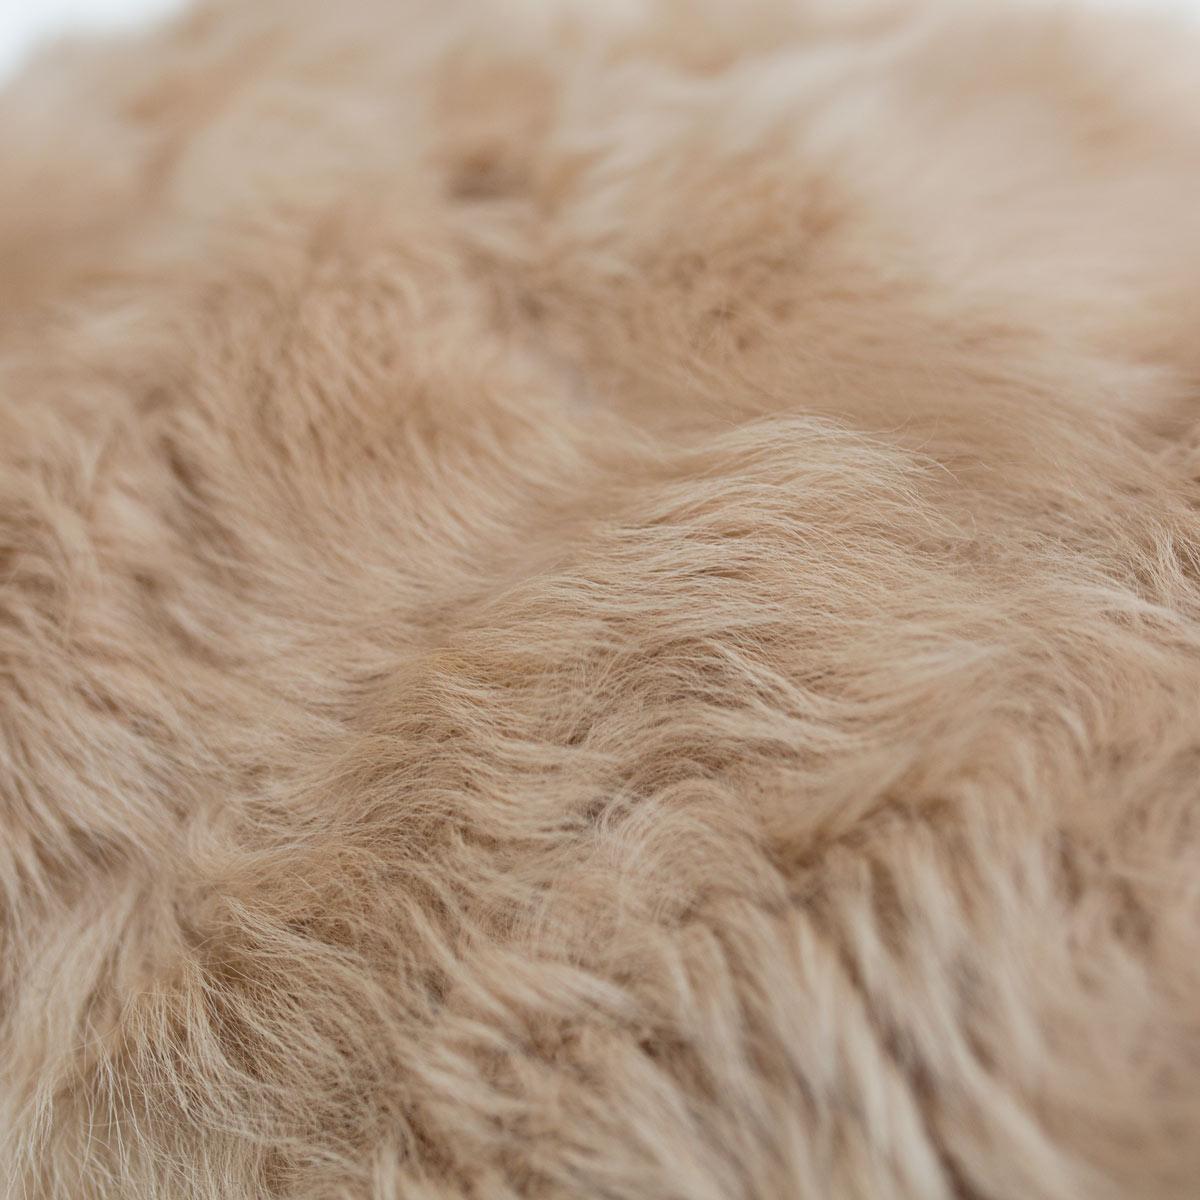 Soft, warm authentic toscana sheep blanket. 100% toscana sheep fur from Spain, this one-of-a-kind piece is sewn from Italian glove company remnants. 

Each piece has its own unique character and no two will be exactly alike. We inspect every inch,